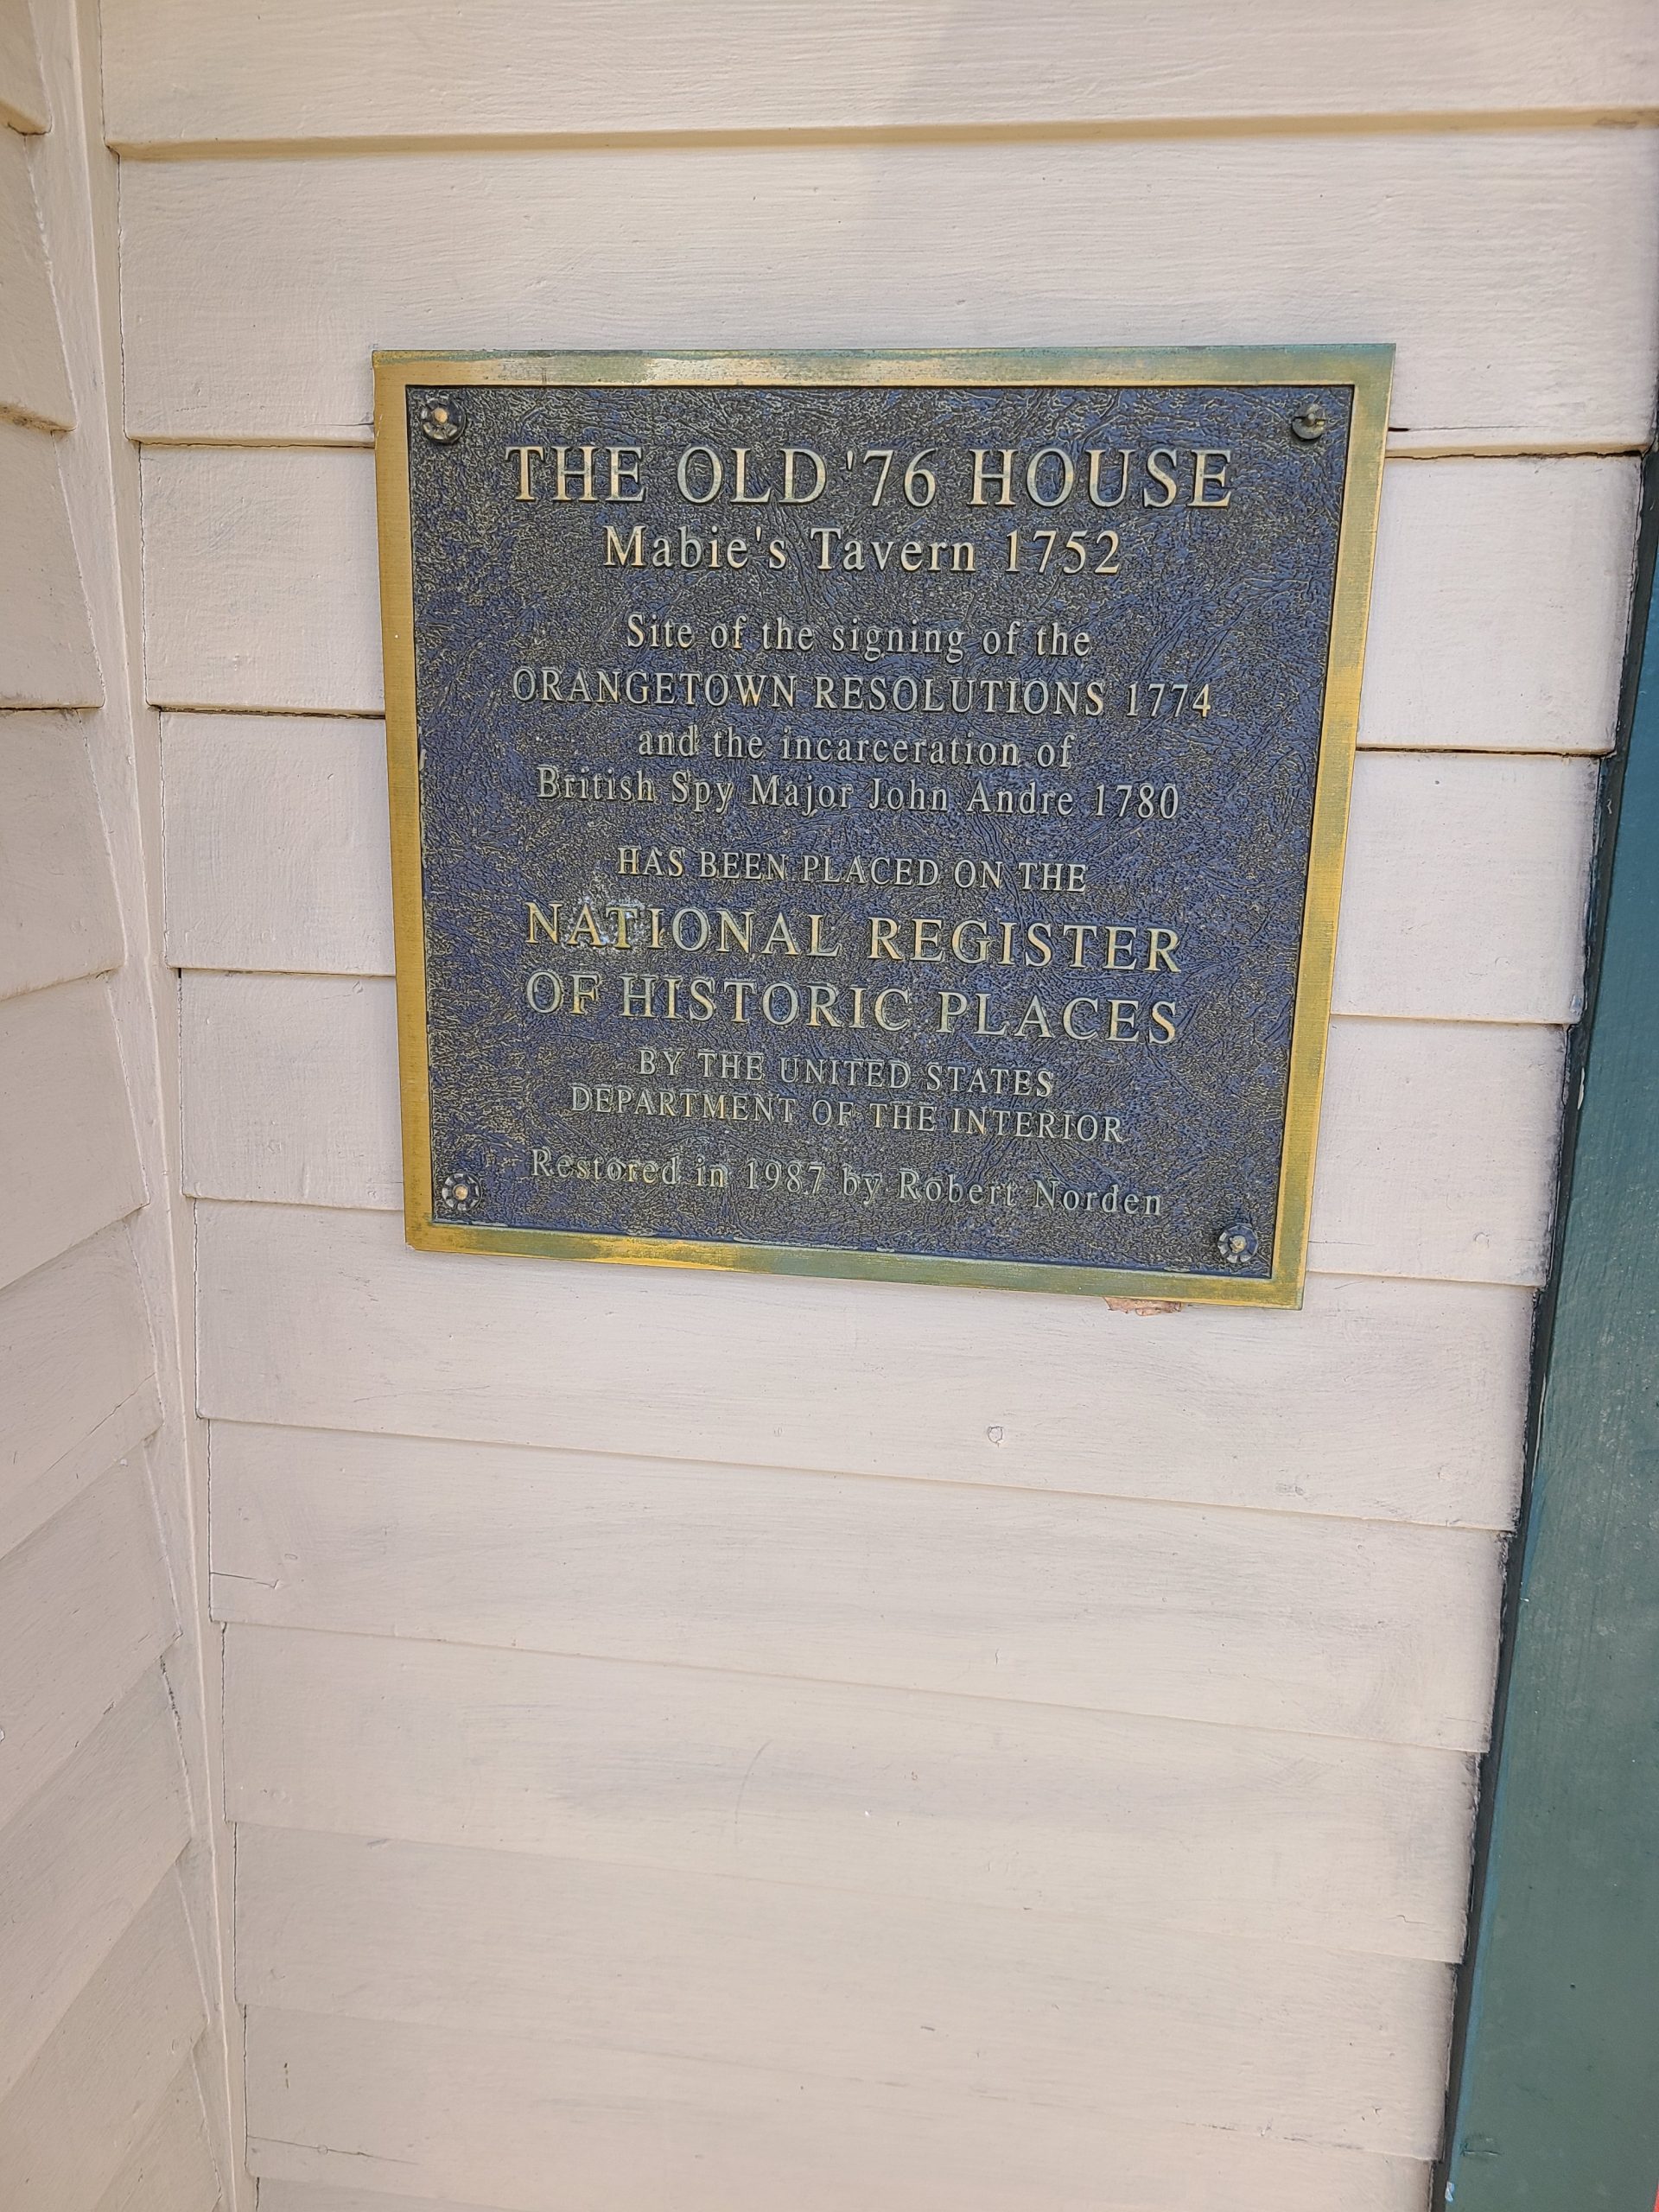 Placard on the Old 76 House